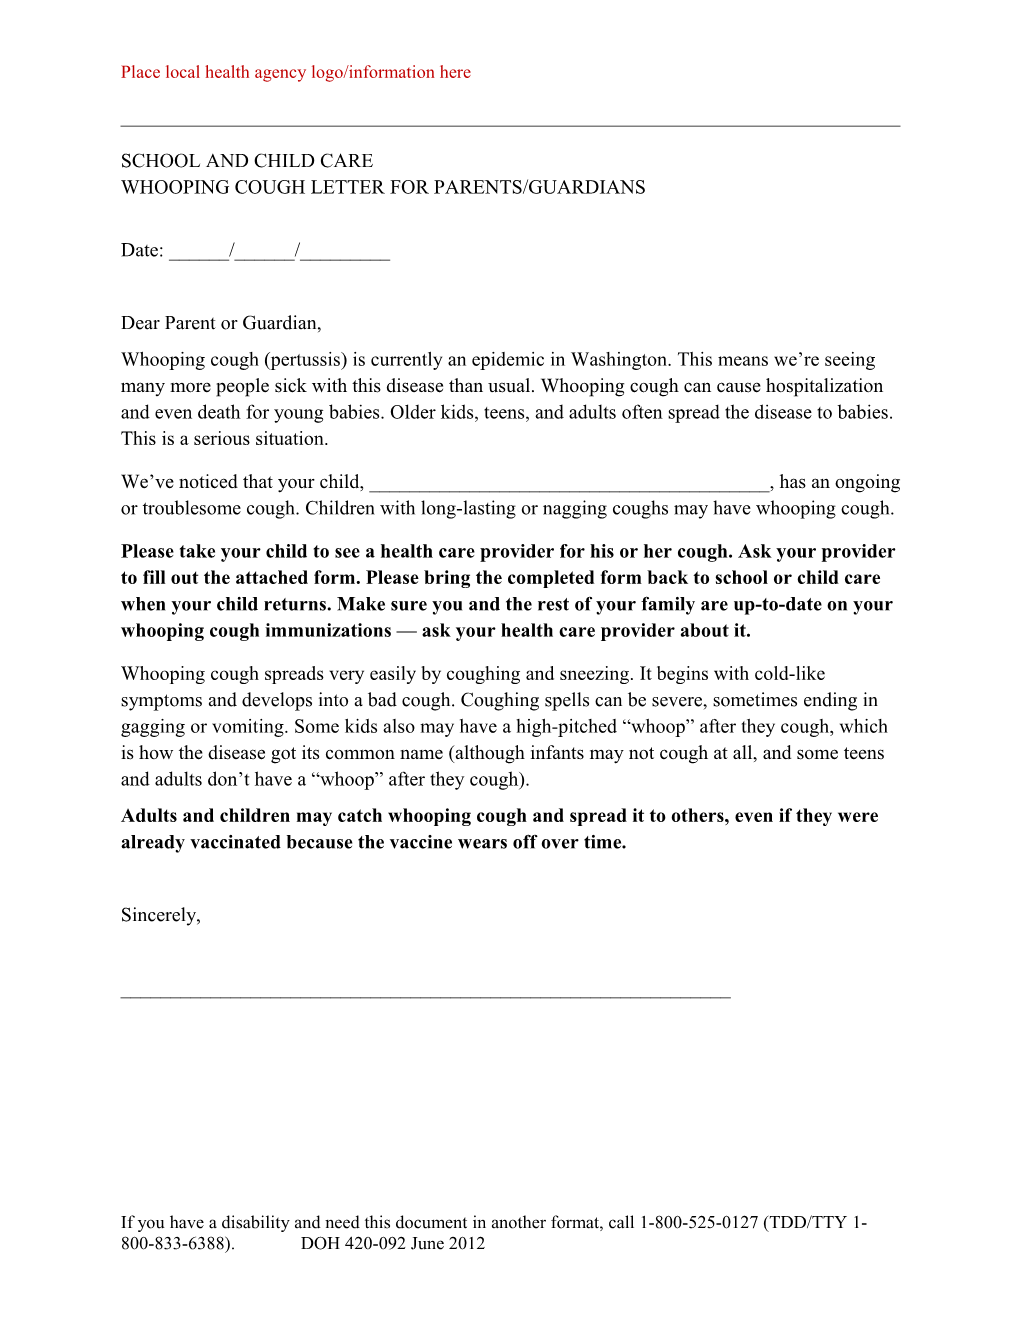 School and Child Care Parent/Guardian Letter About Whooping Cough